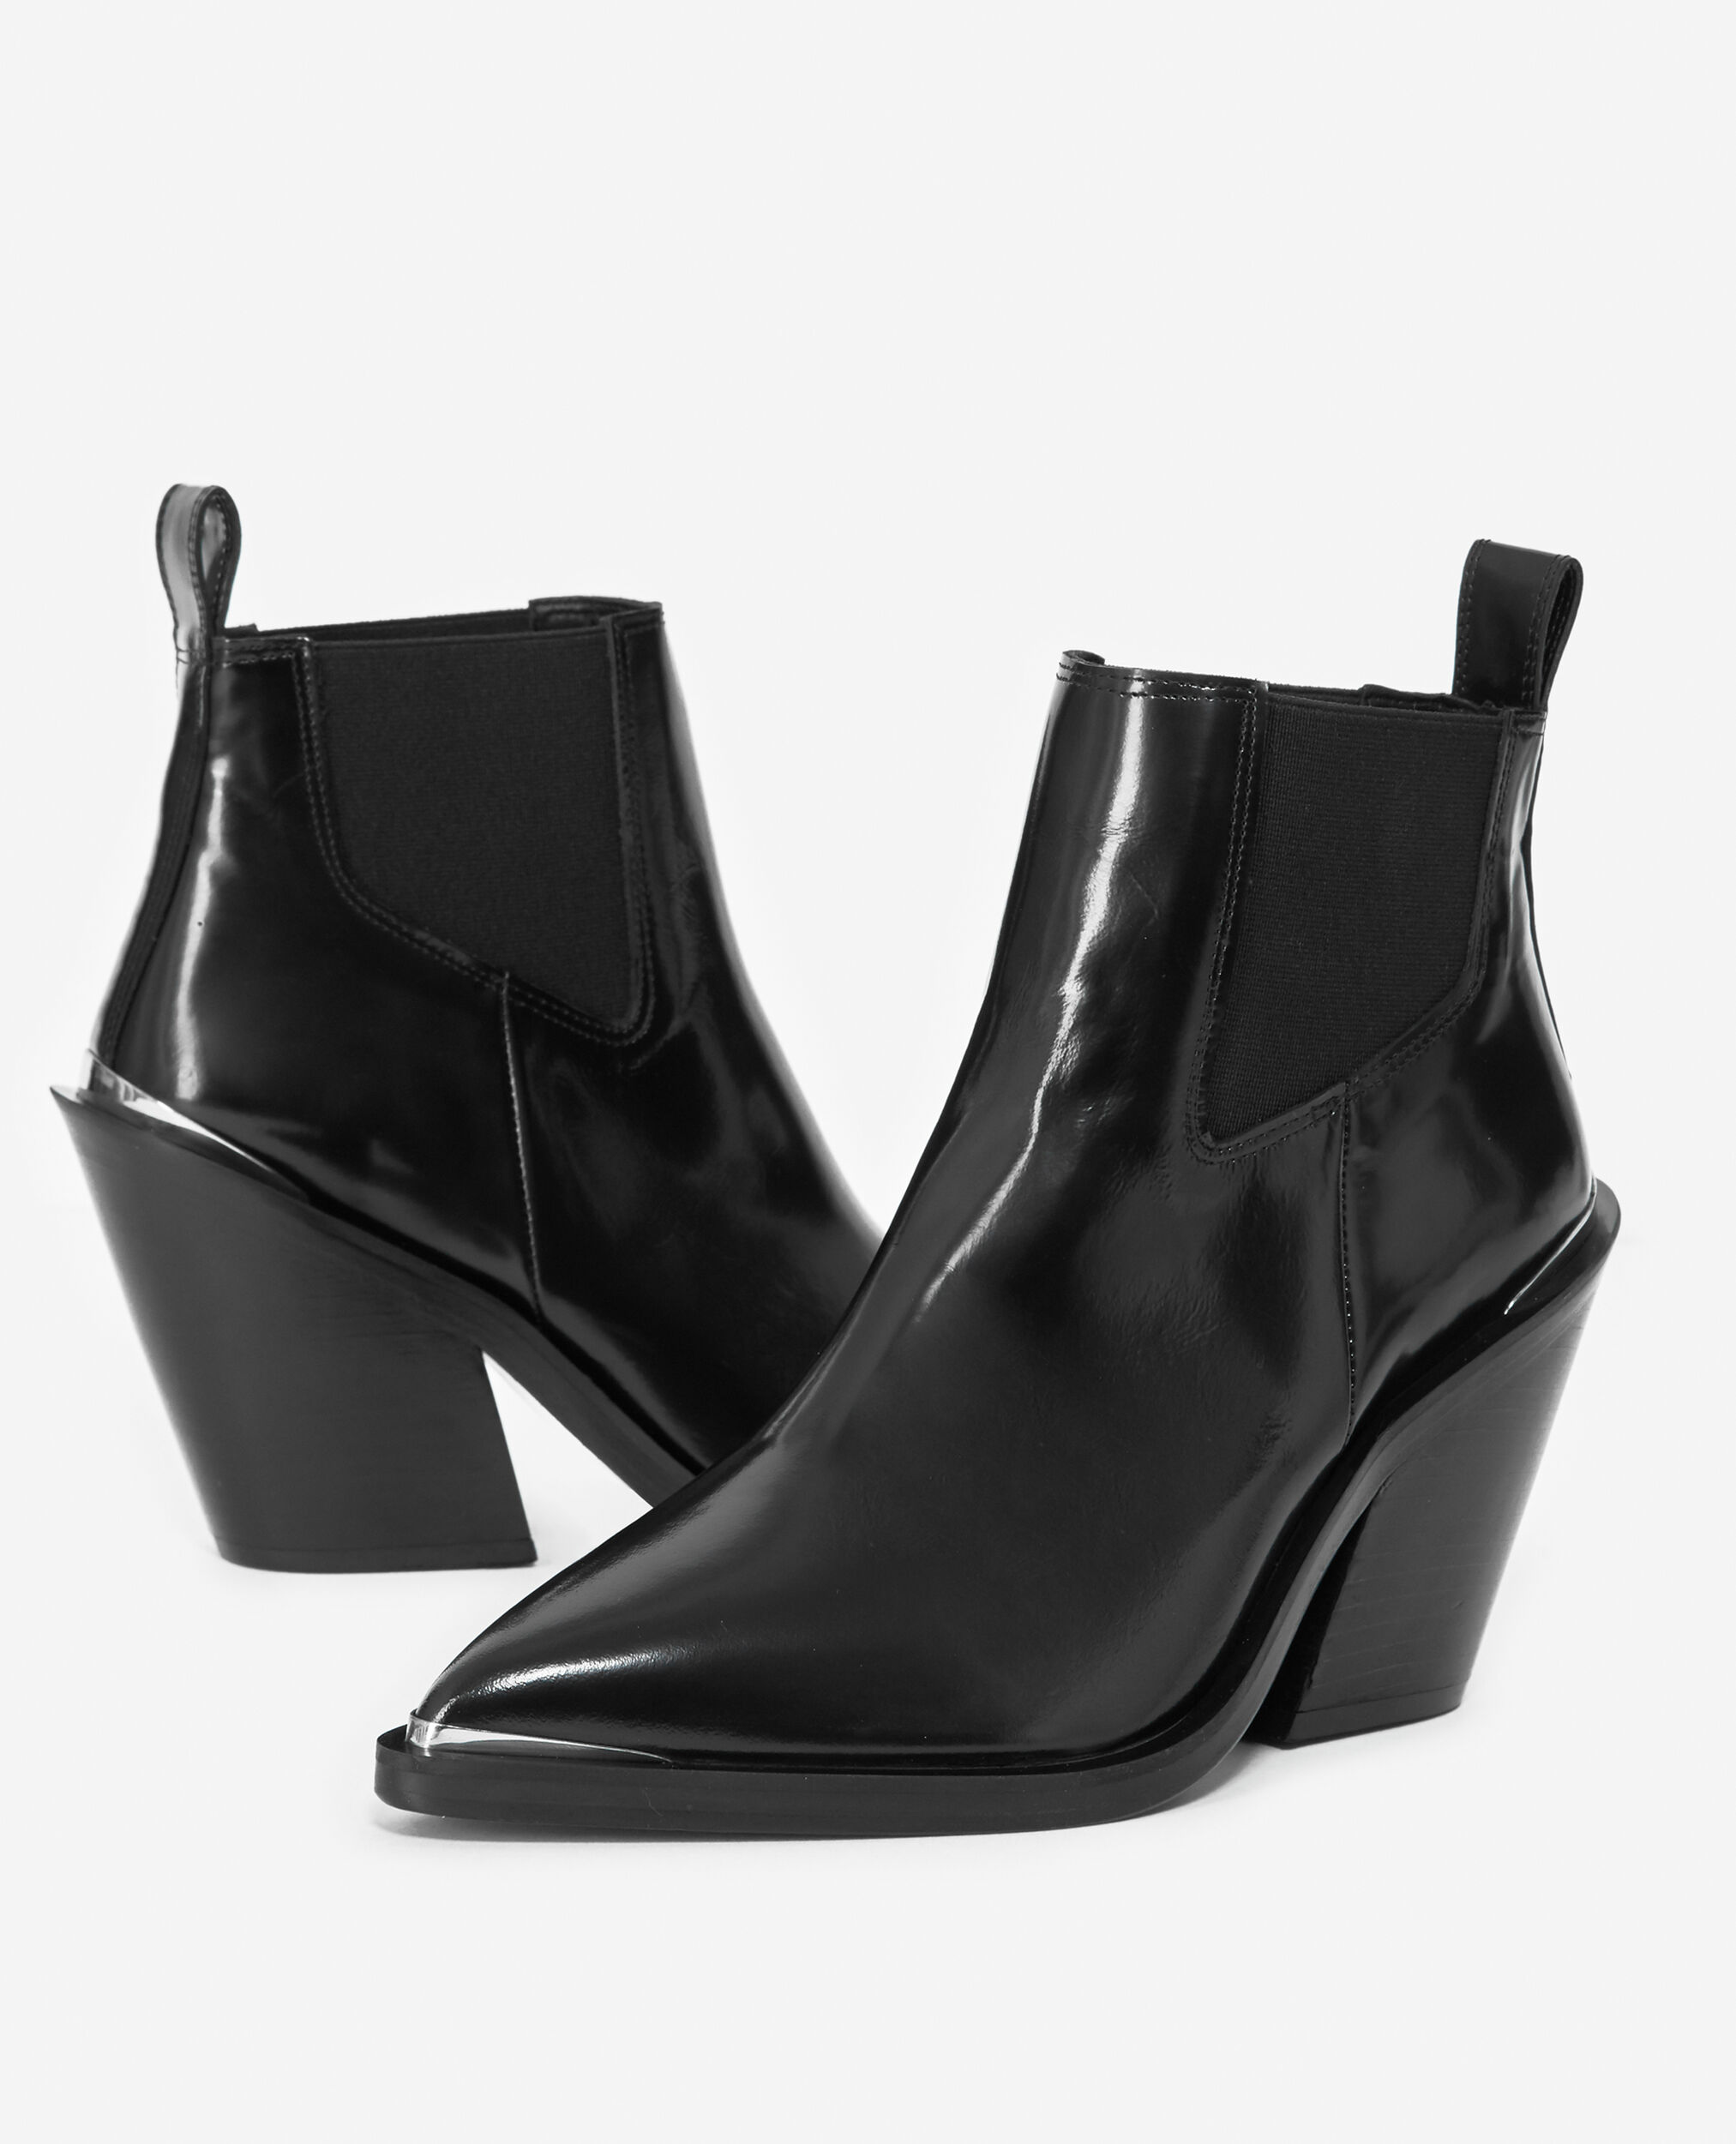 Glossy black leather boots in western style, BLACK, hi-res image number null